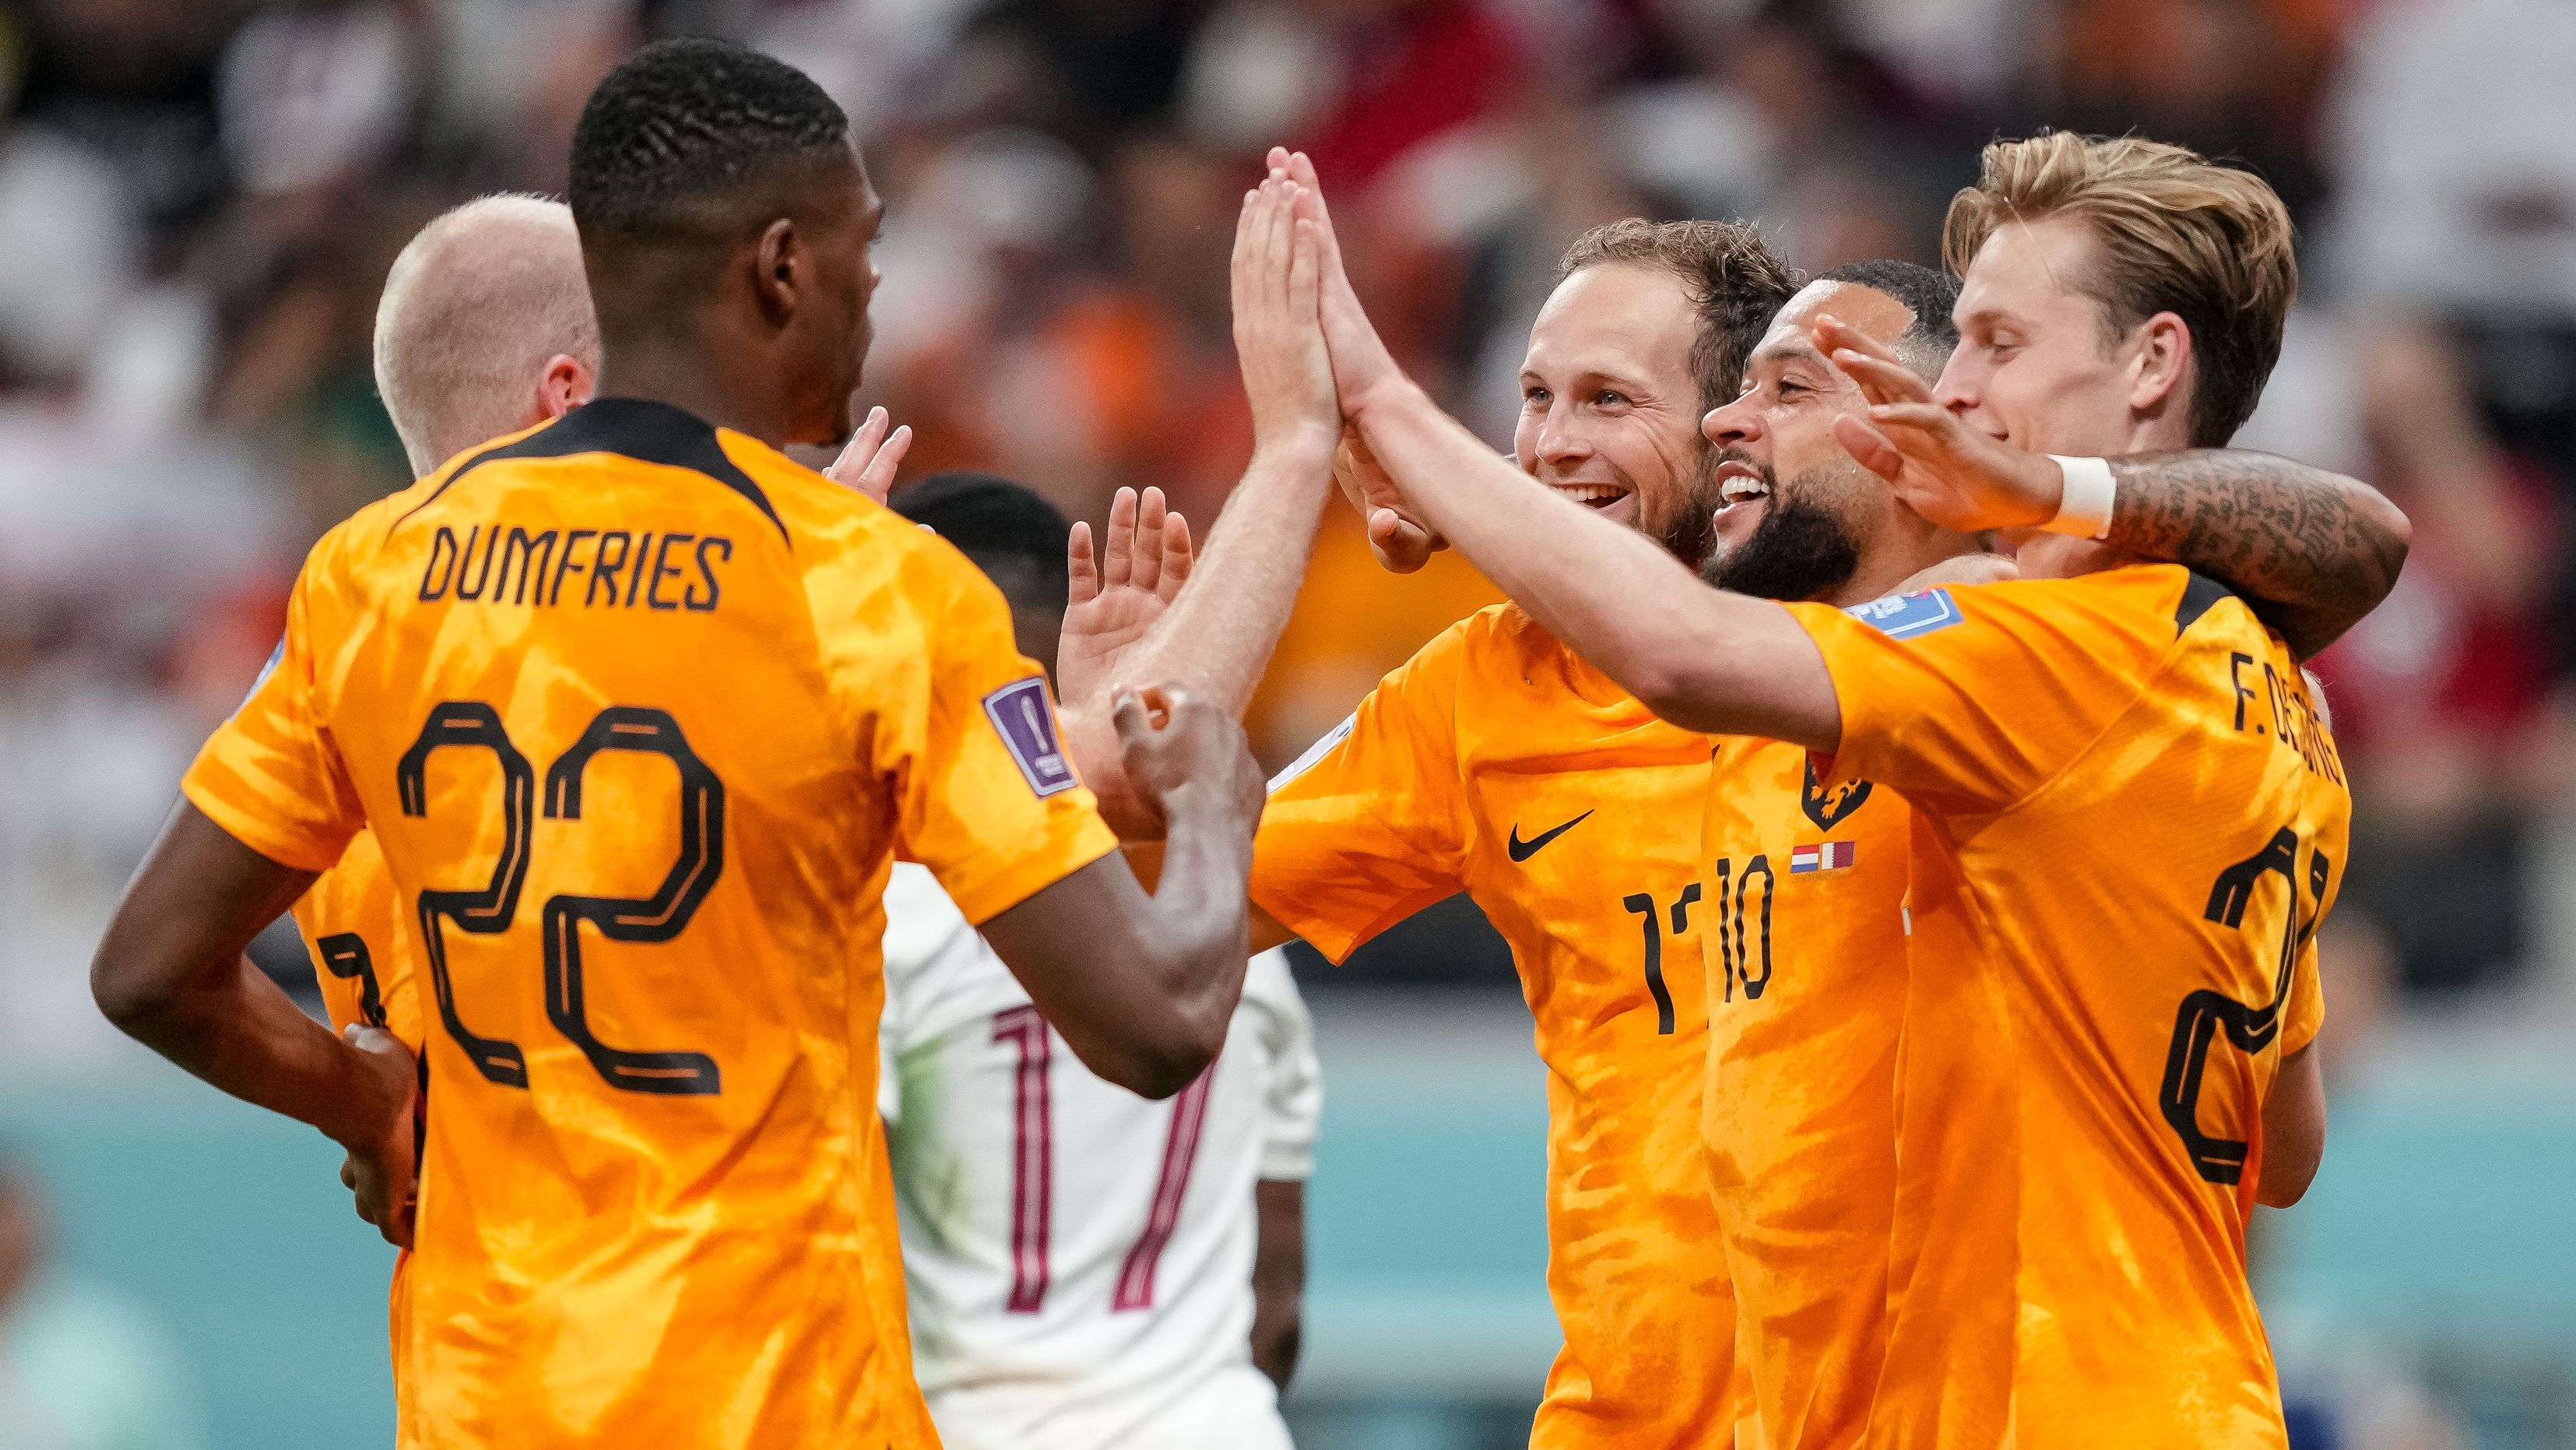 AL KHOR, QATAR - NOVEMBER 29: Frenkie de Jong of Netherlands celebrates after scoring his team&#x27;s second goal with teammates during the FIFA World Cup Qatar 2022 Group A match between Netherlands and Qatar at Al Bayt Stadium on November 29, 2022 in Al Khor, Qatar. (Photo by Manuel Reino Berengui/DeFodi Images via Getty Images)